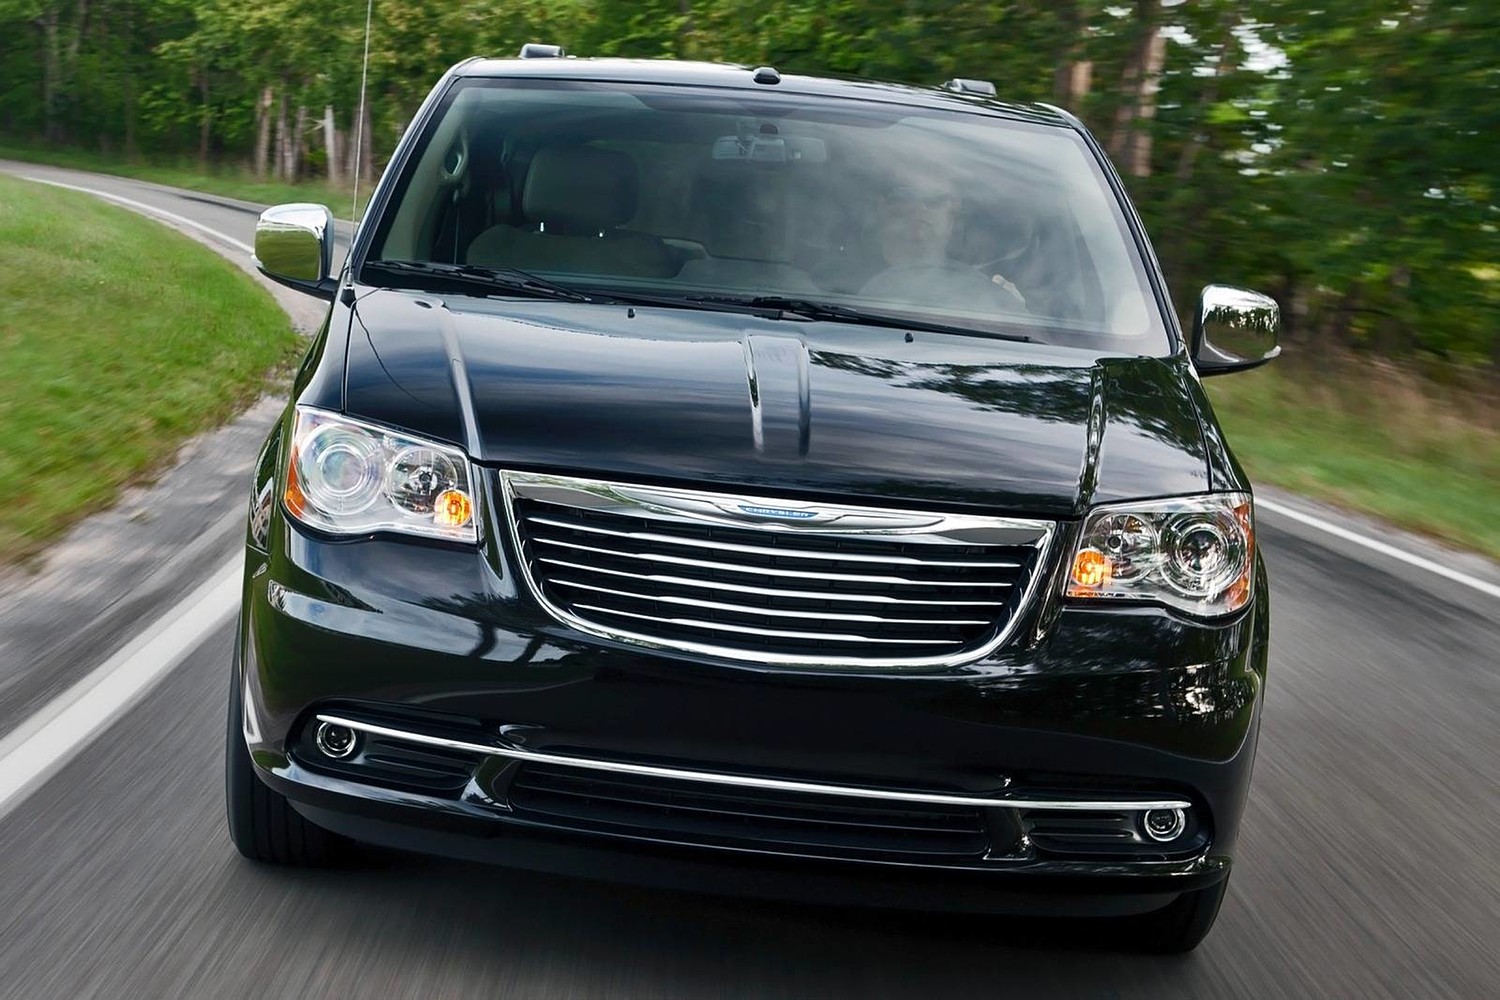 Chrysler Town and Country Limited Passenger Minivan Exterior (2013 model year shown)